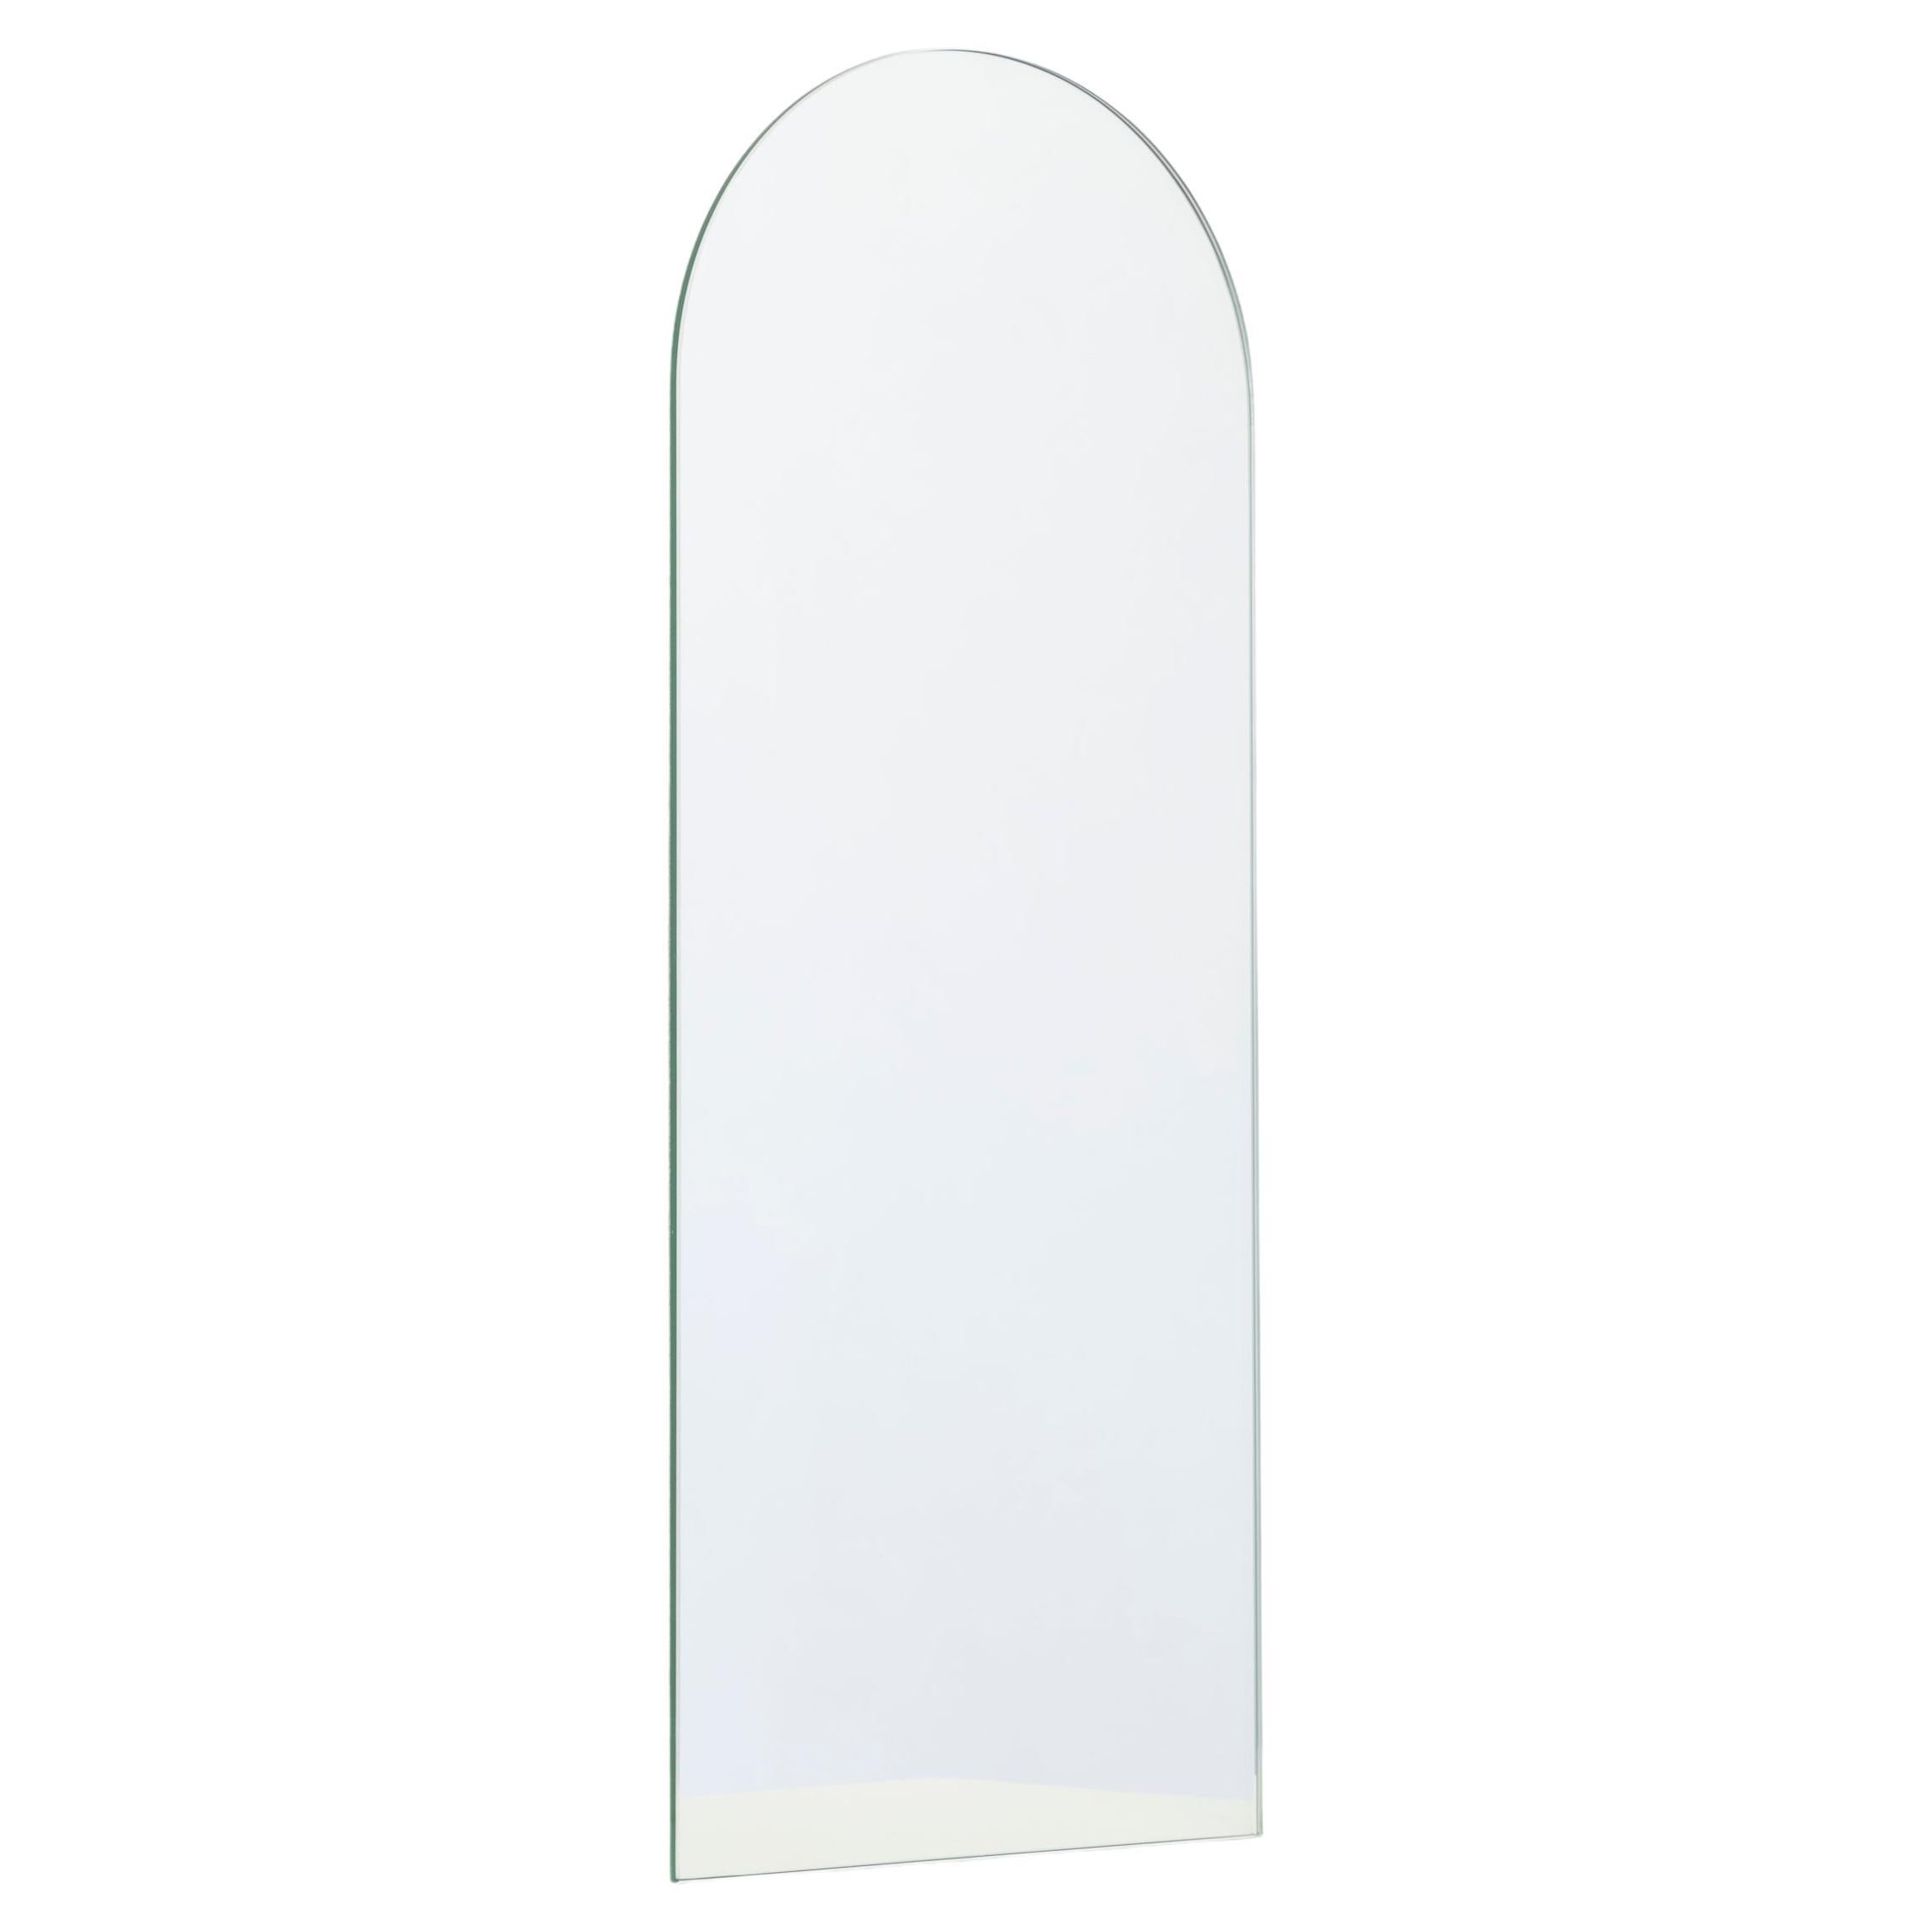 Arcus Arched shaped Minimalist Frameless Mirror with Floating Effect, Small